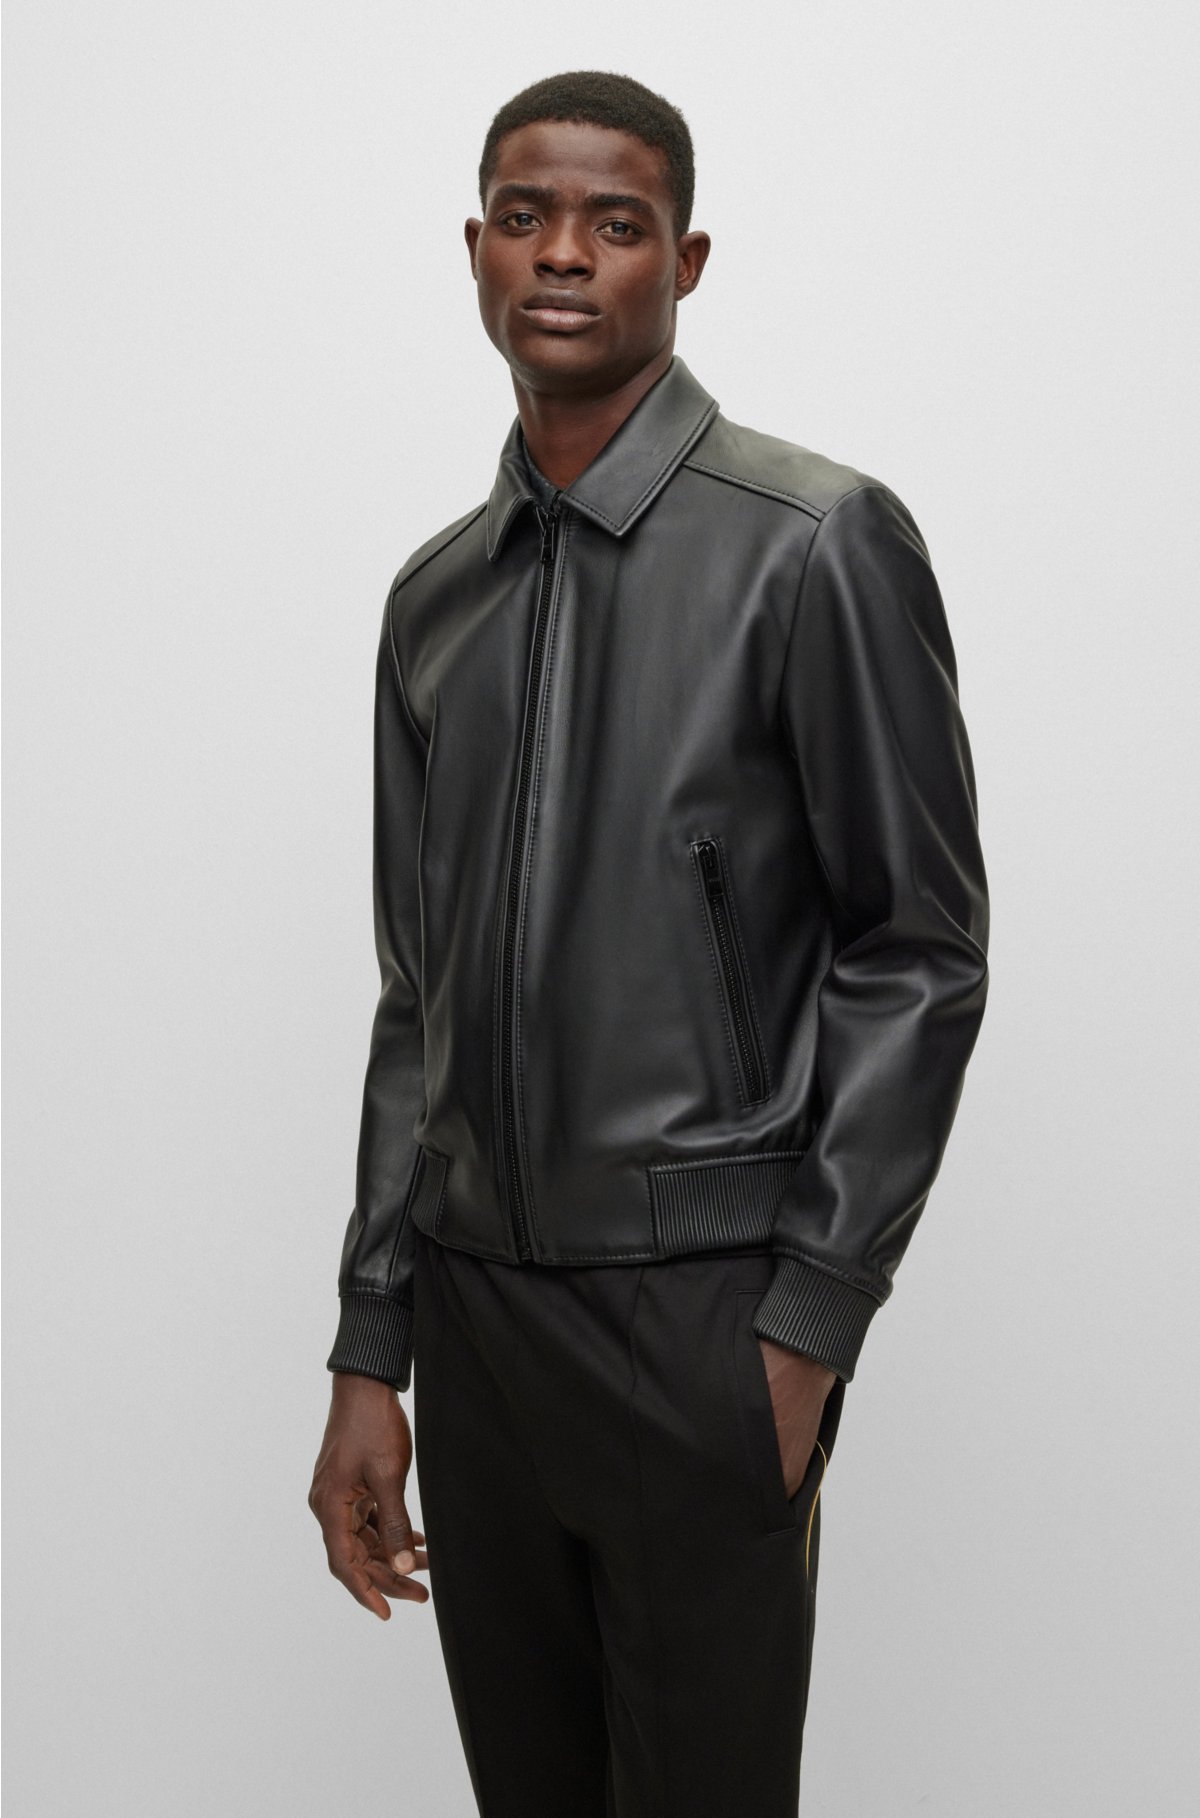 BOSS - Nappa-leather bomber jacket with wing collar